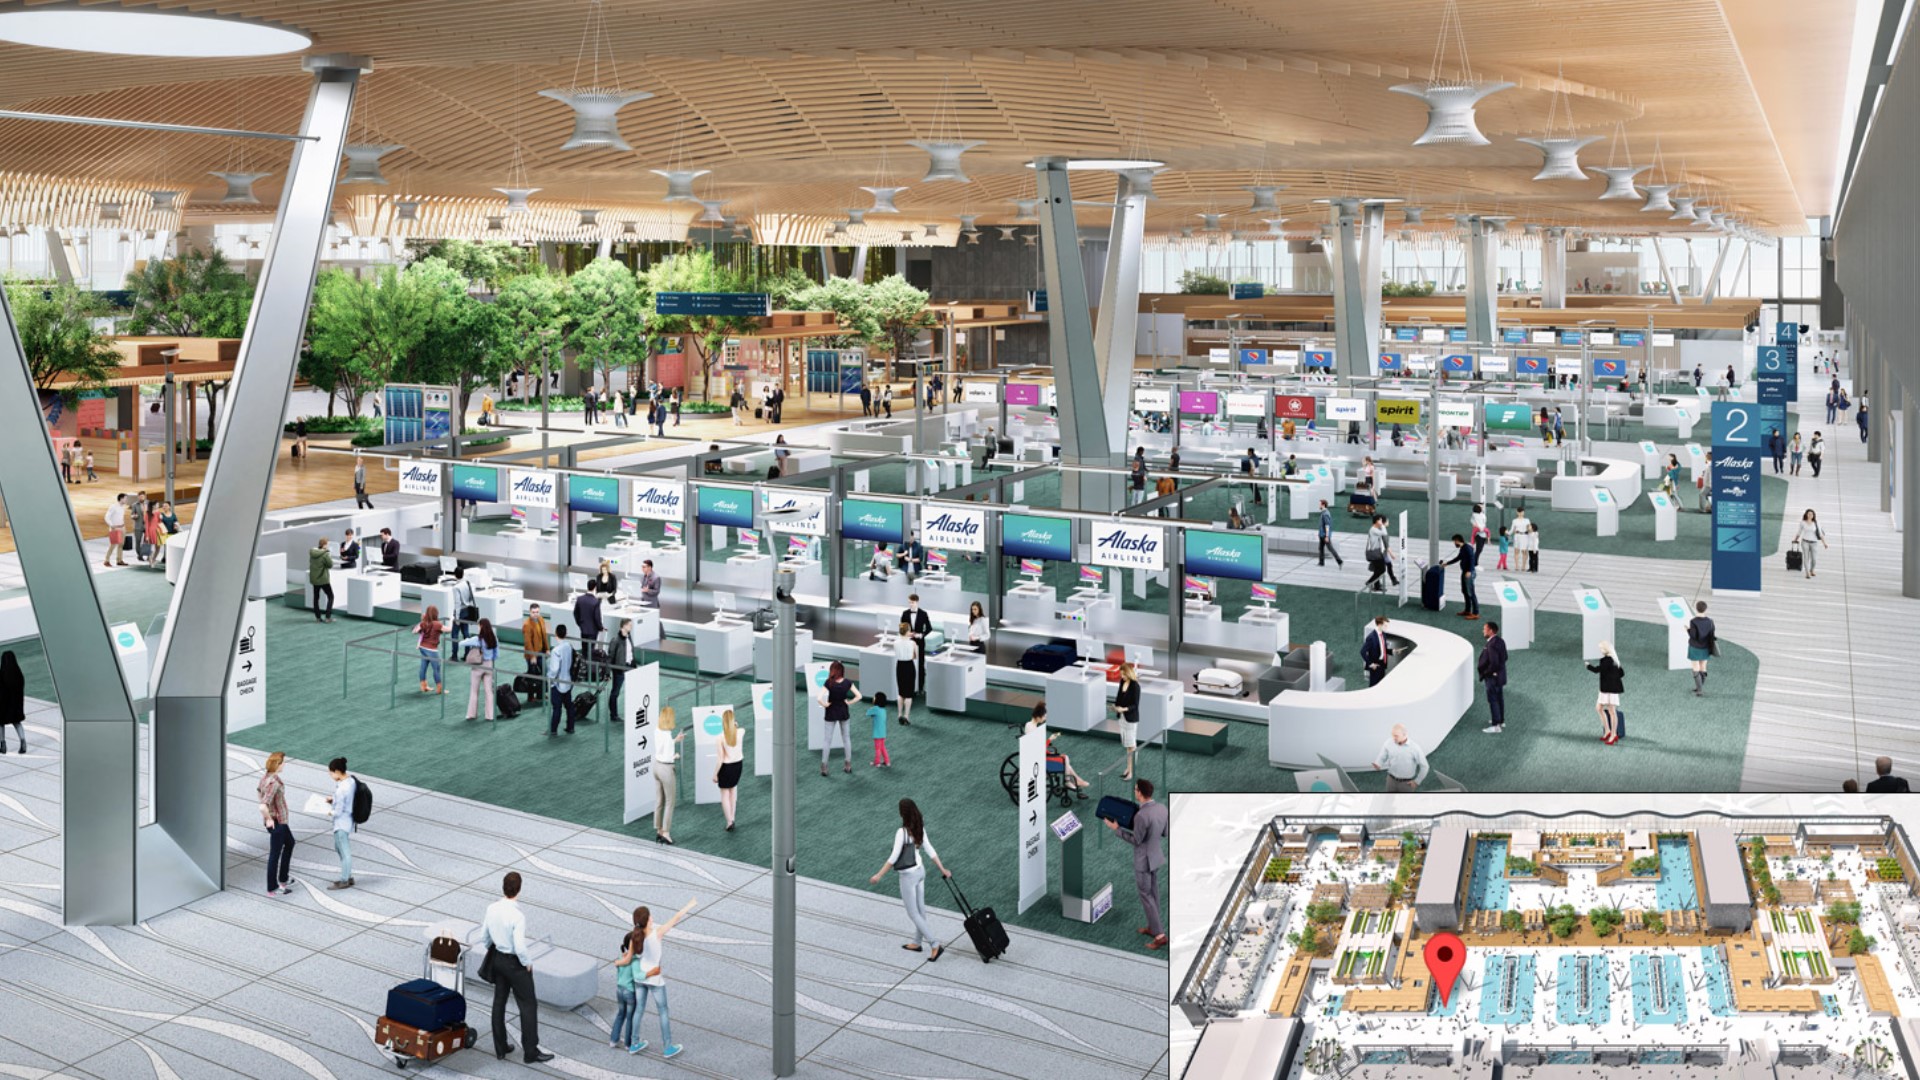 The Portland International Airport (PDX) and ZGF Architects finally gave Portlanders a look at what the new main terminal will eventually look like in 2025.